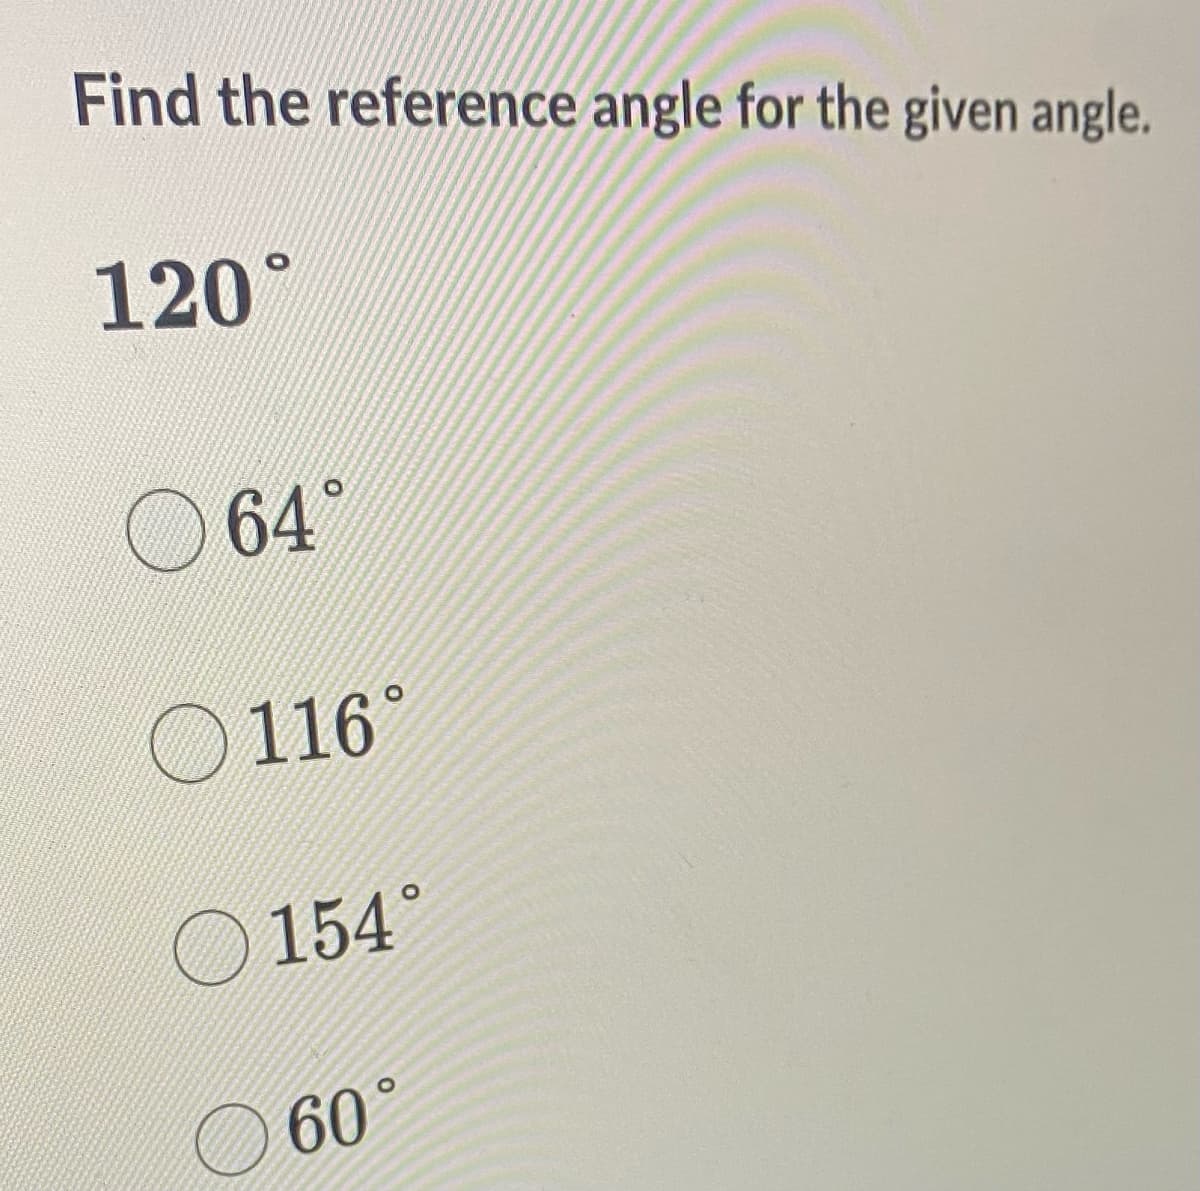 Find the reference angle for the given angle.
120°
64°
116°
154°
60°